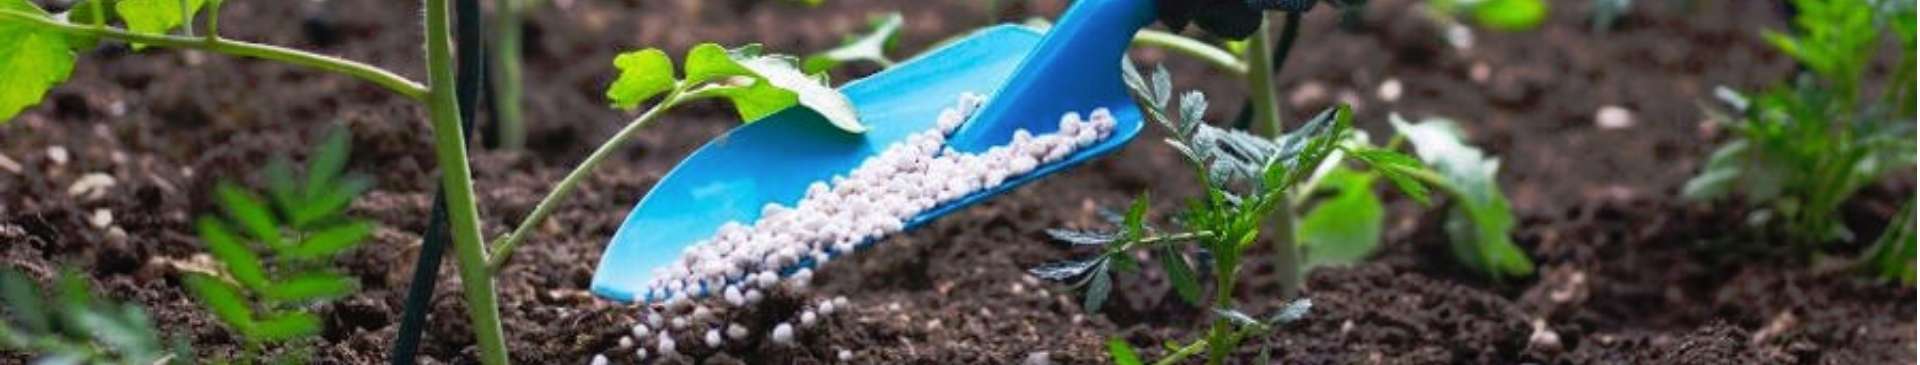 A Complete Guide to Using Fertiliser in the Home Garden 